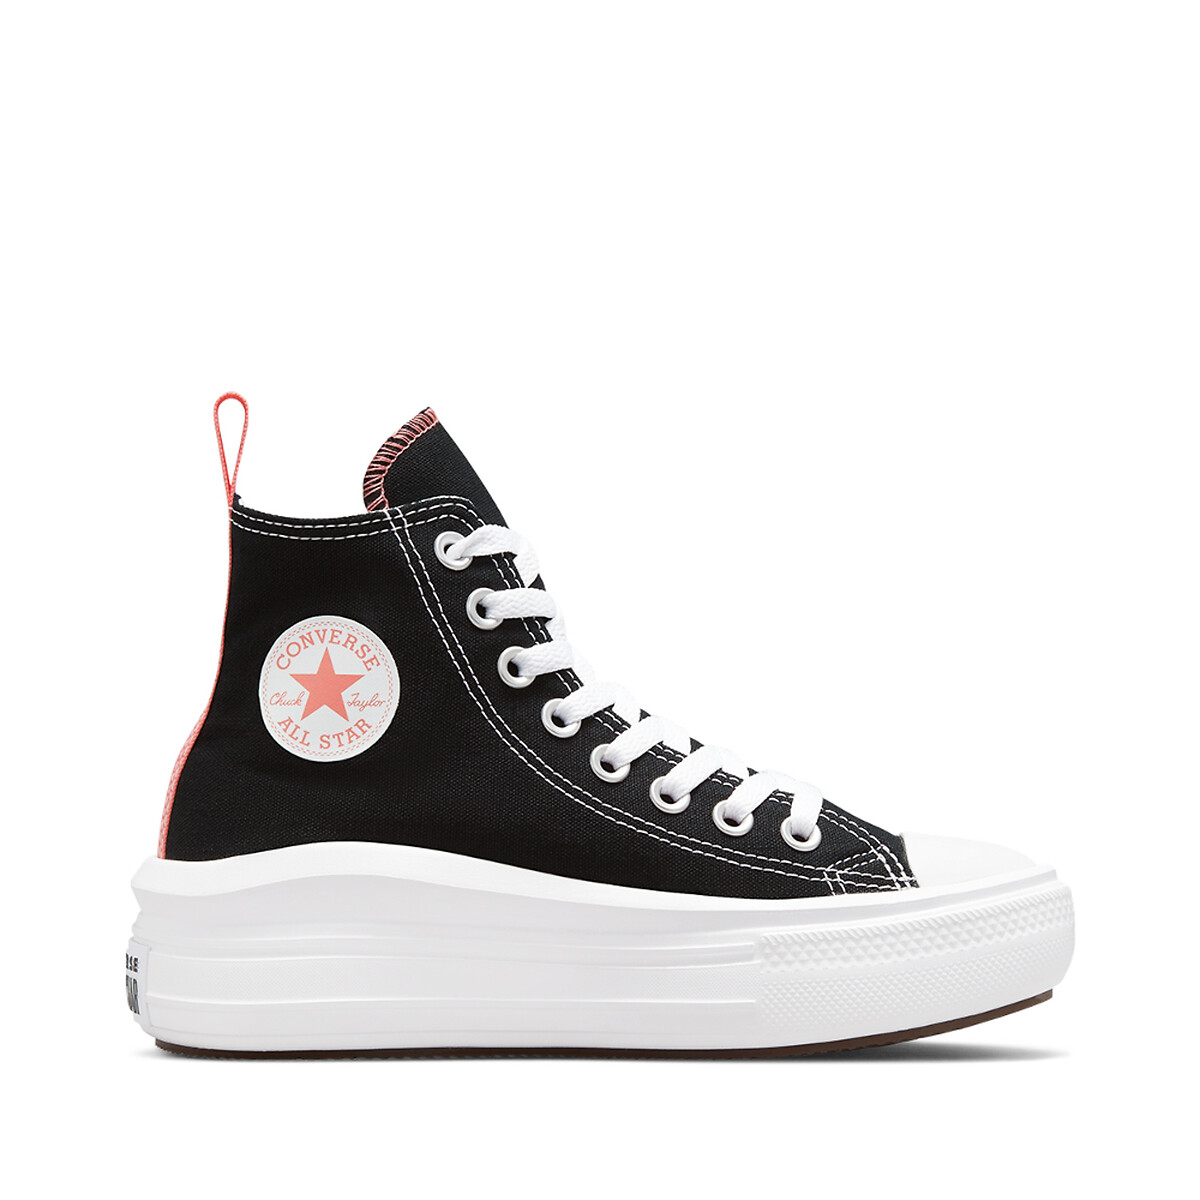 Kids chuck taylor all star move canvas high top trainers, black ...